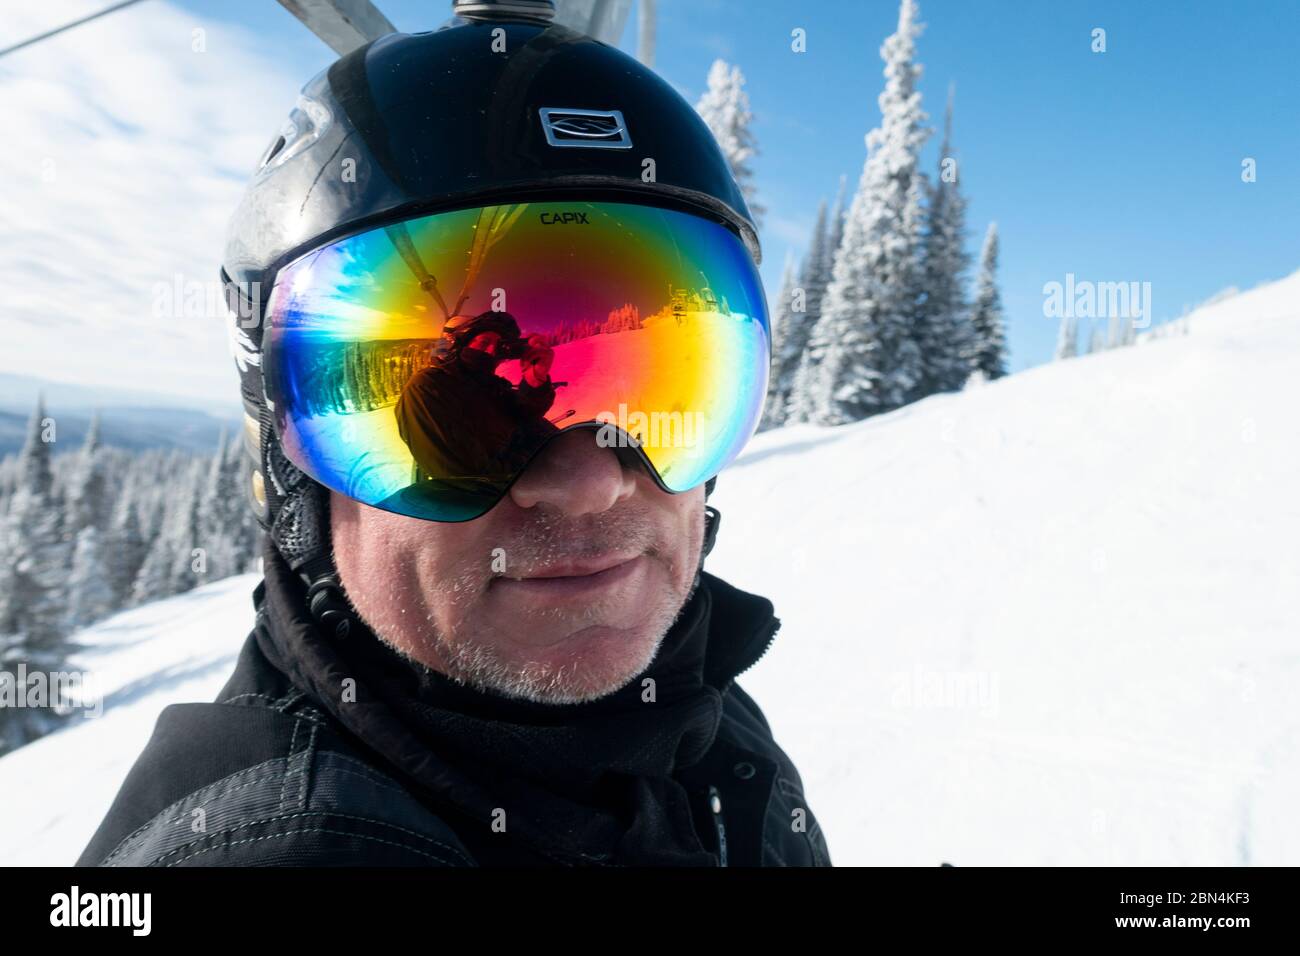 Close-up of a man wearing goggles and a helmet, Sun Peaks Resort, Sun Peaks, British Columbia, Canada Stock Photo